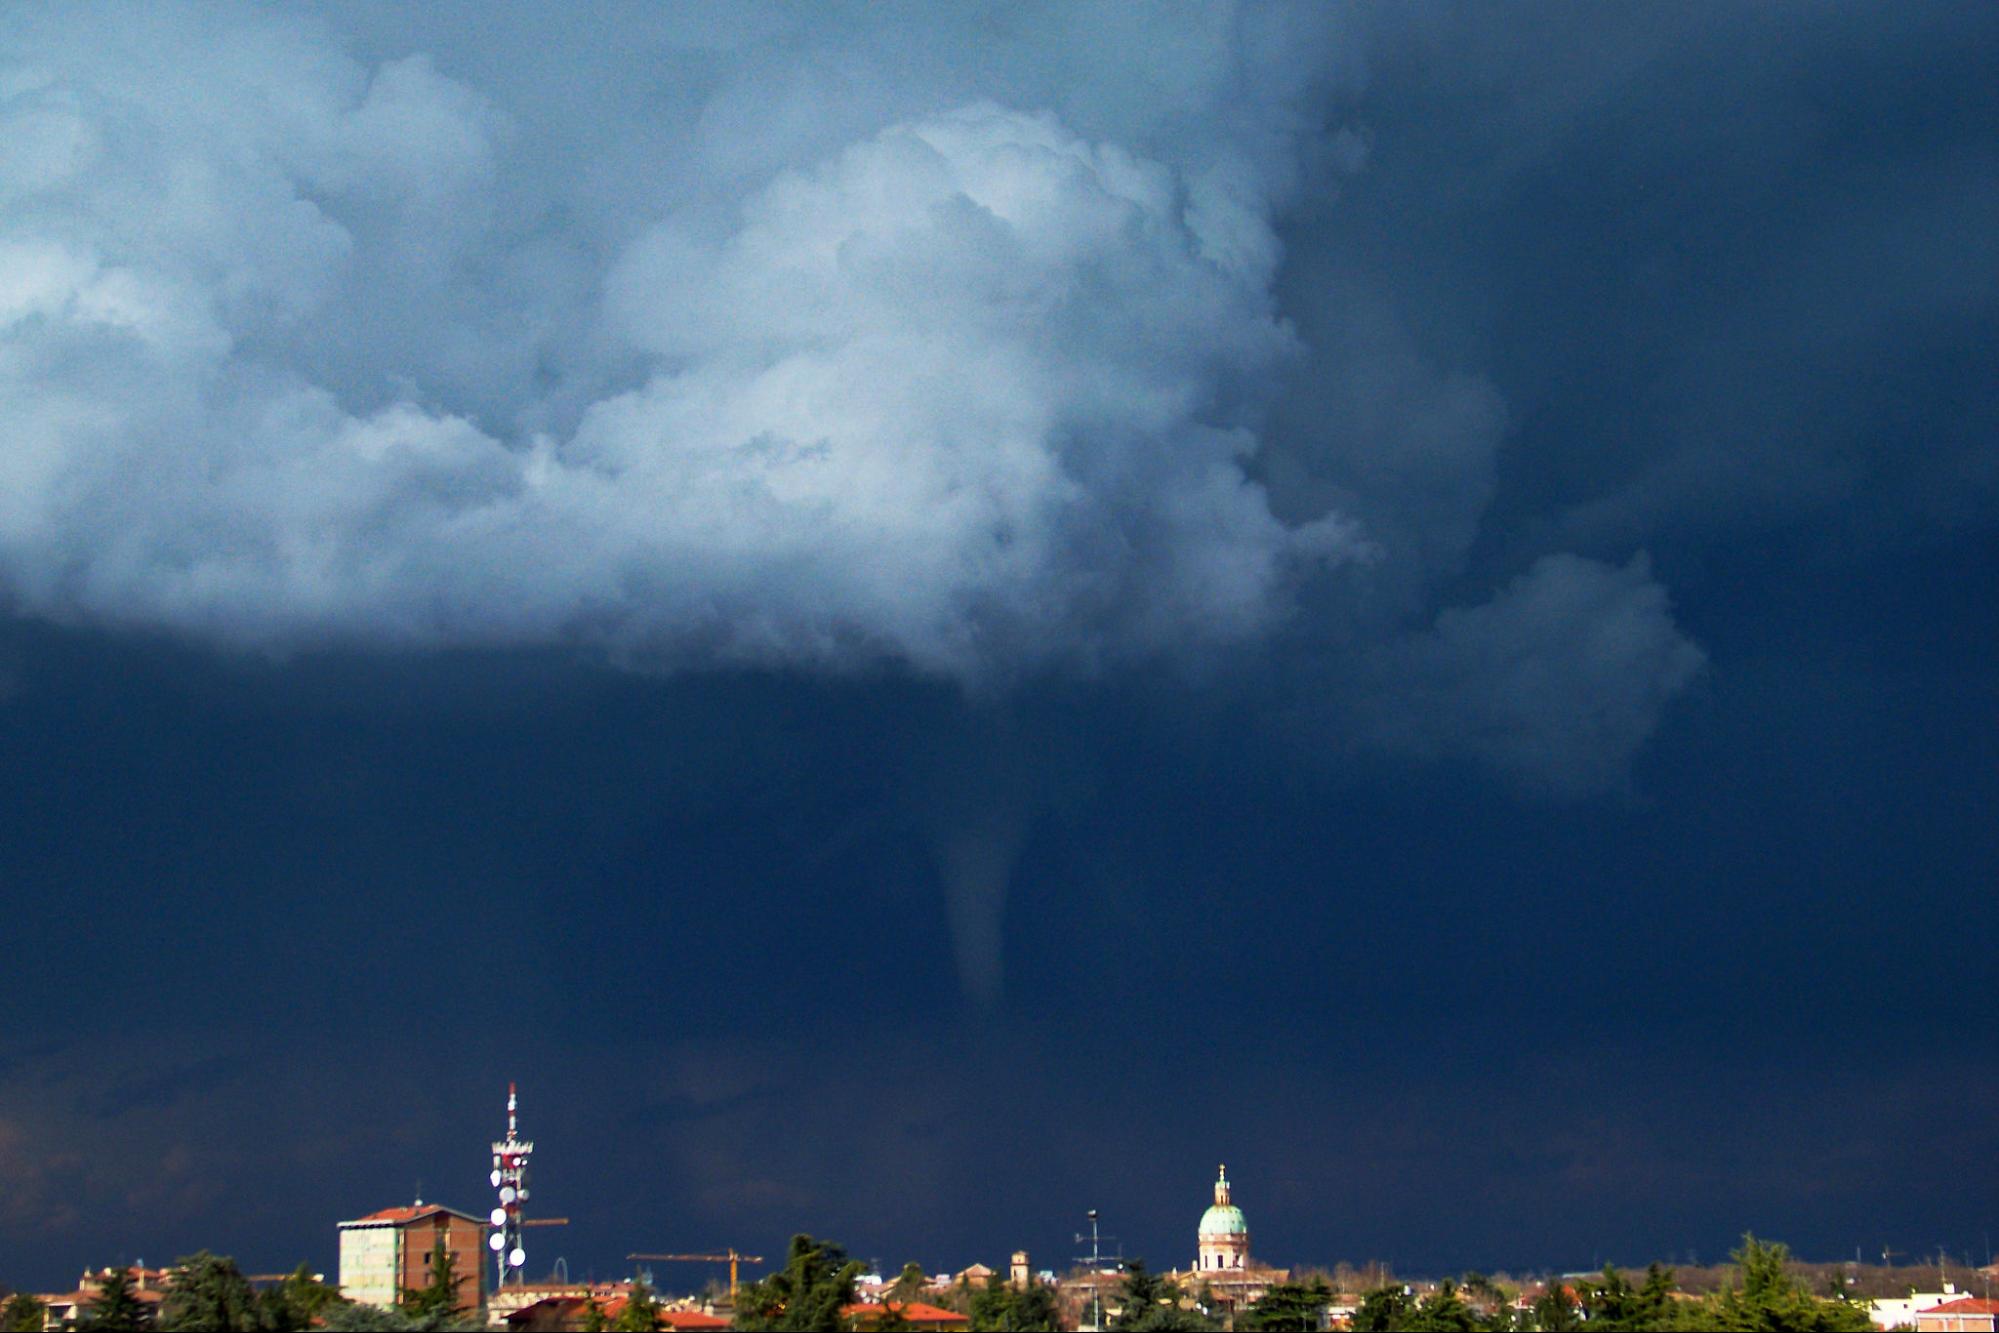 Explainer: Was Tornado Outbreak Related to Climate Change?